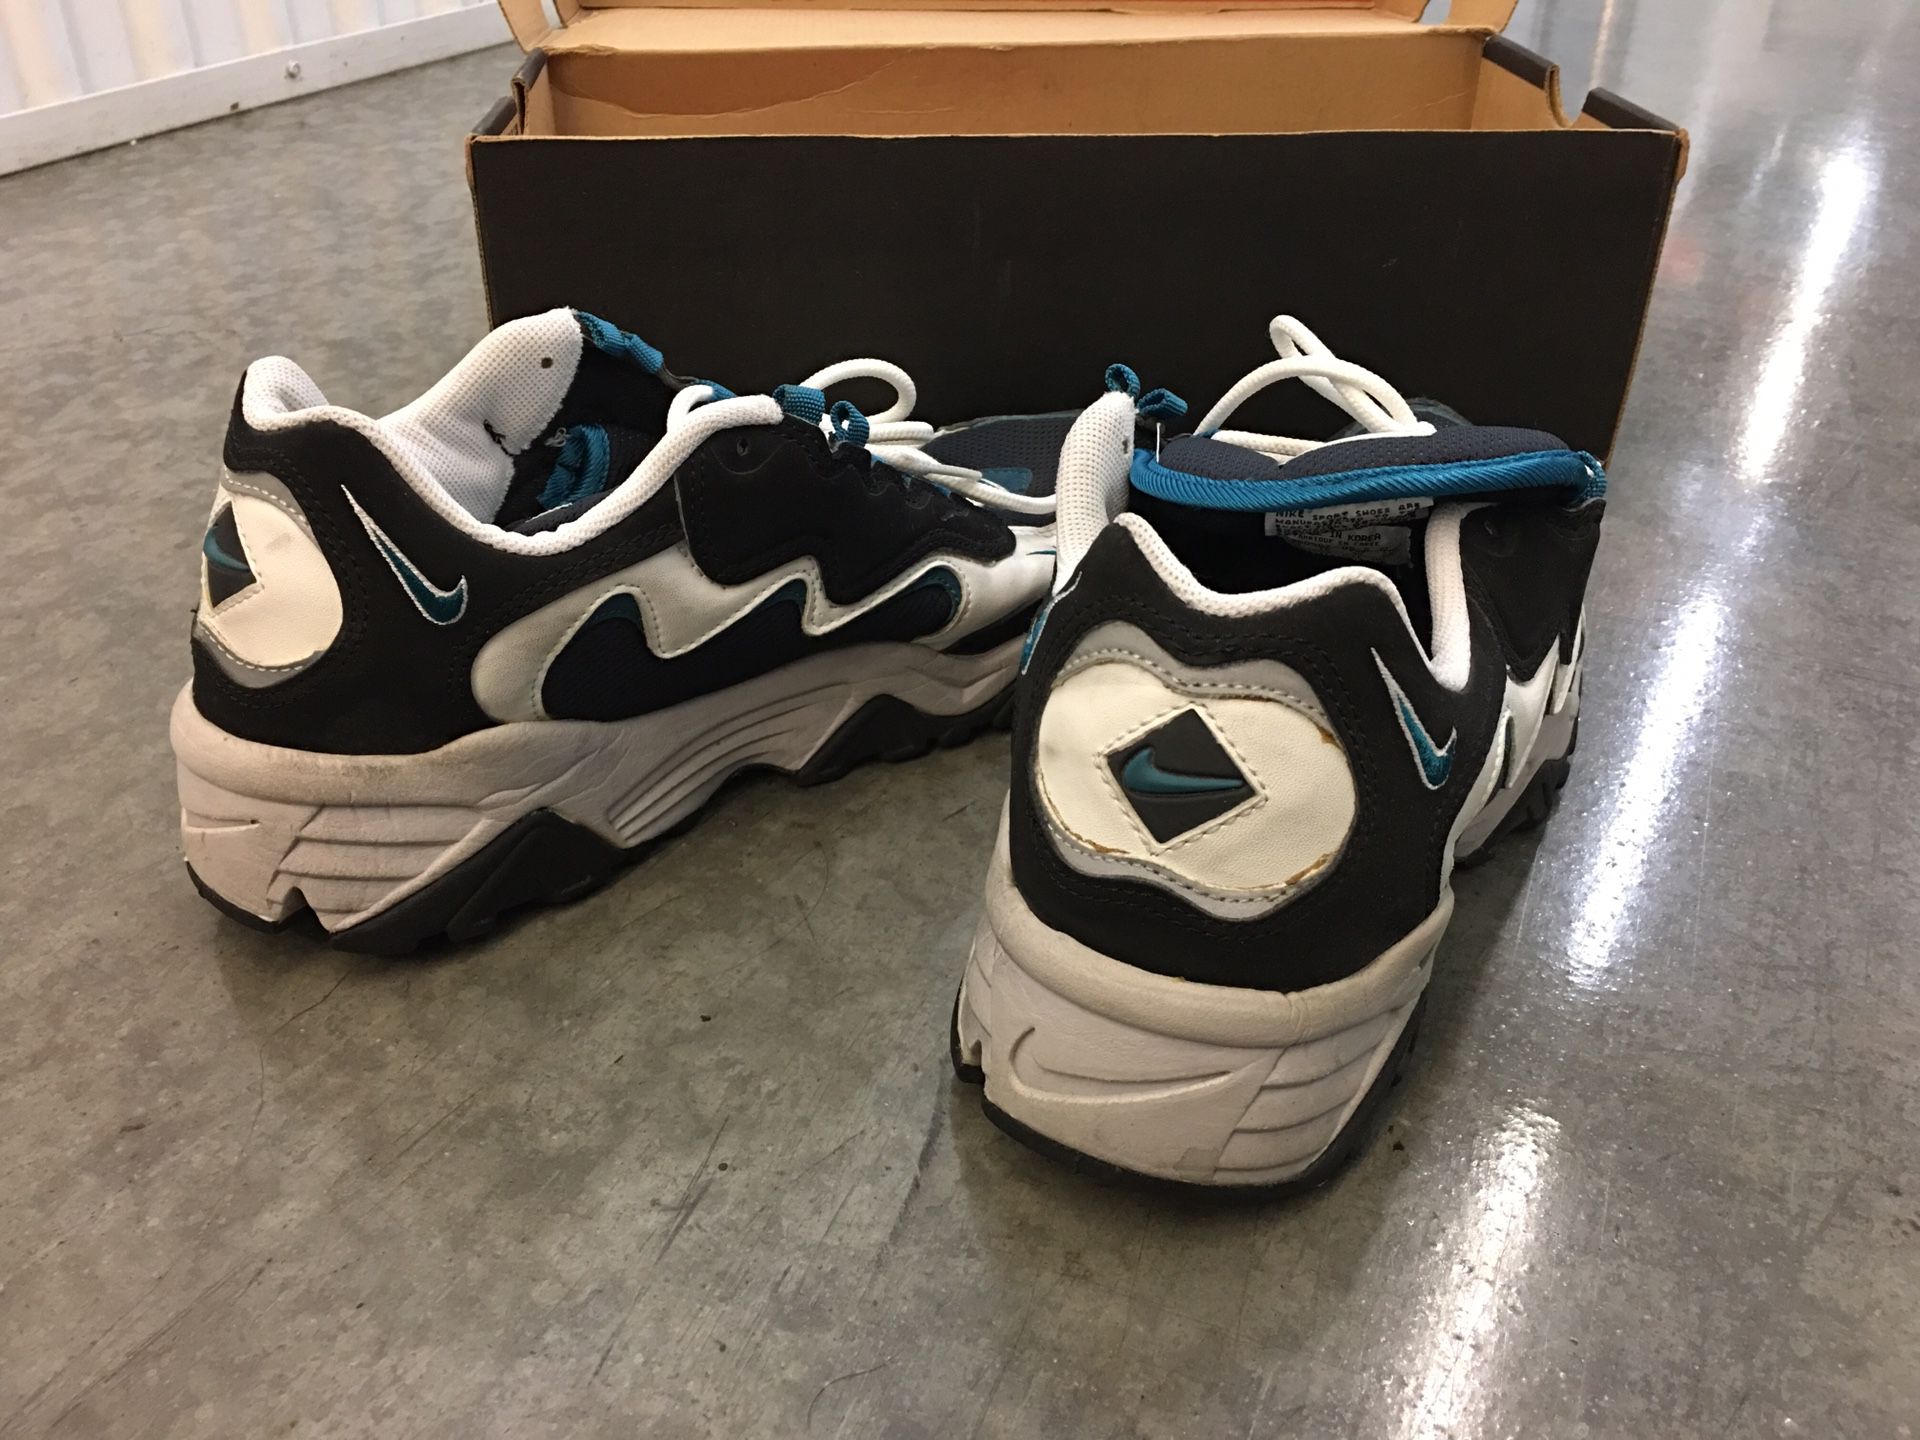 Vintage 1996 Nike Air Terra Outback Shoes w/ box for Sale in Santa ...